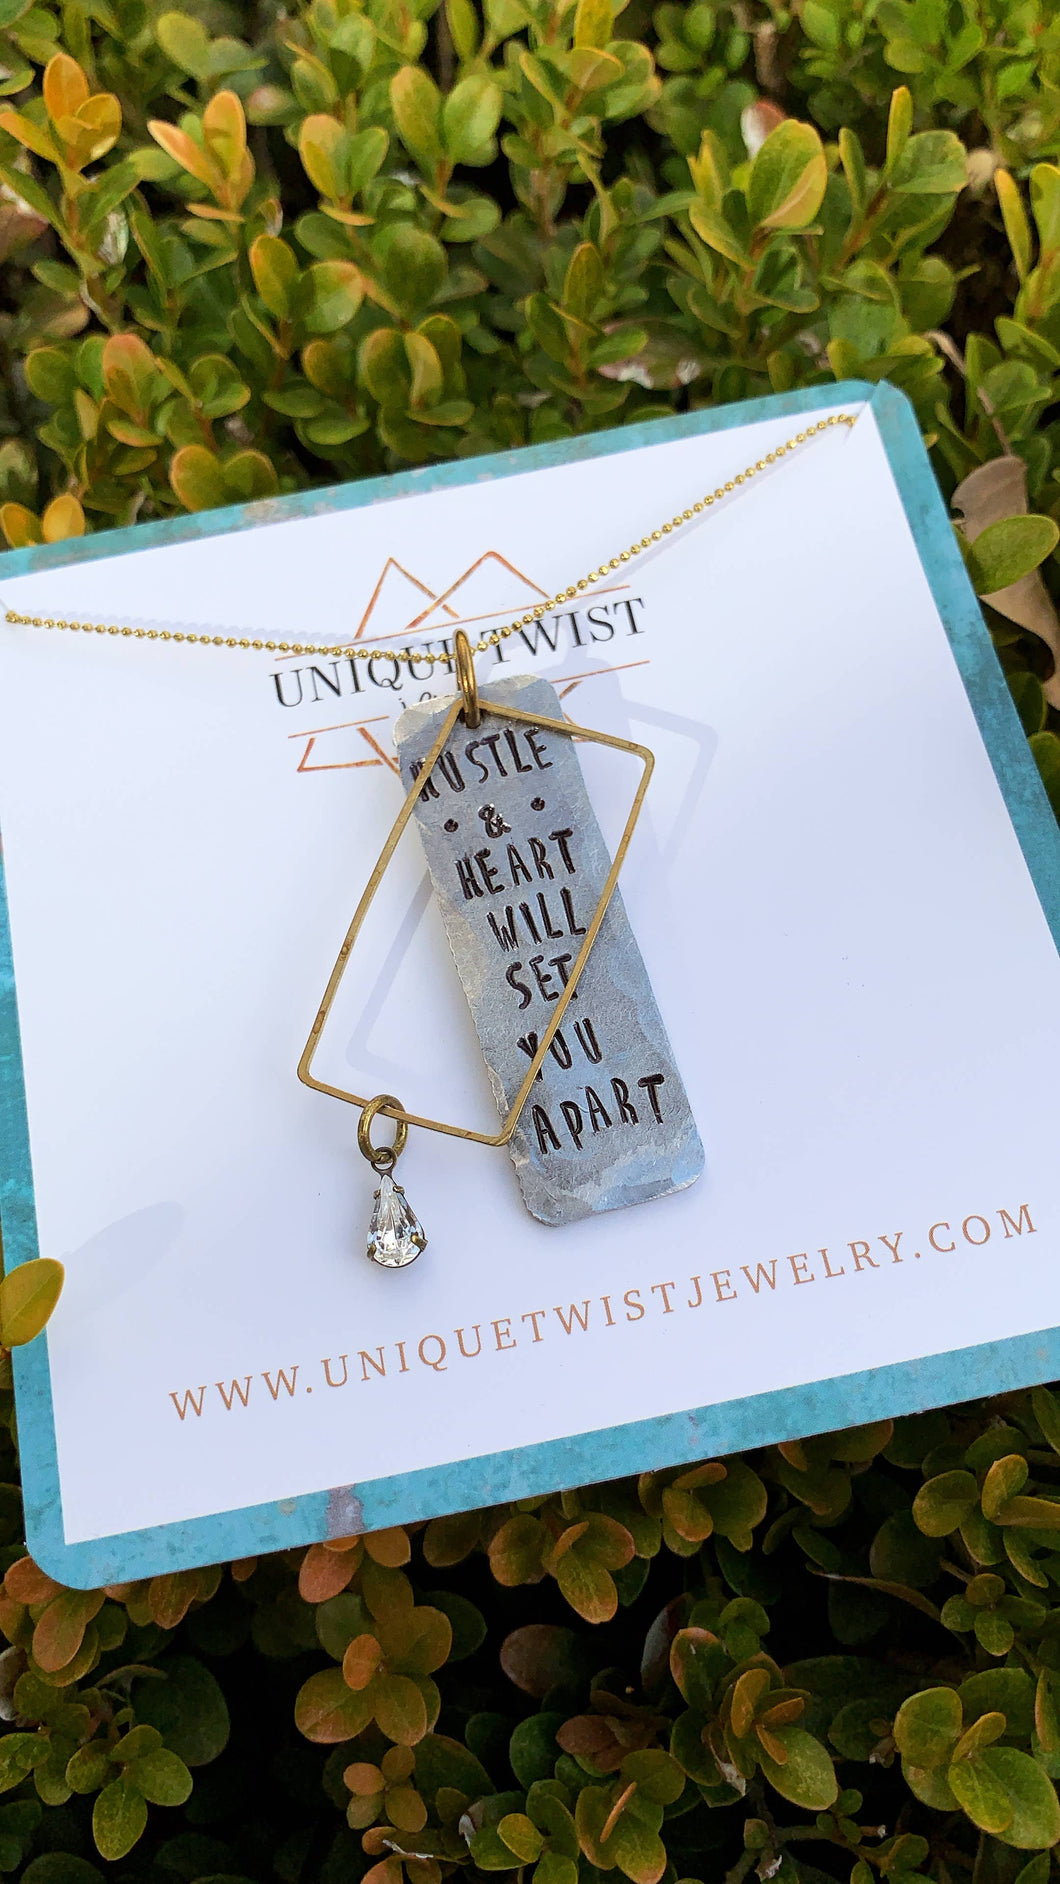 Unique Twist Jewelry - Hustle And Heart Will Set You Apart Necklace